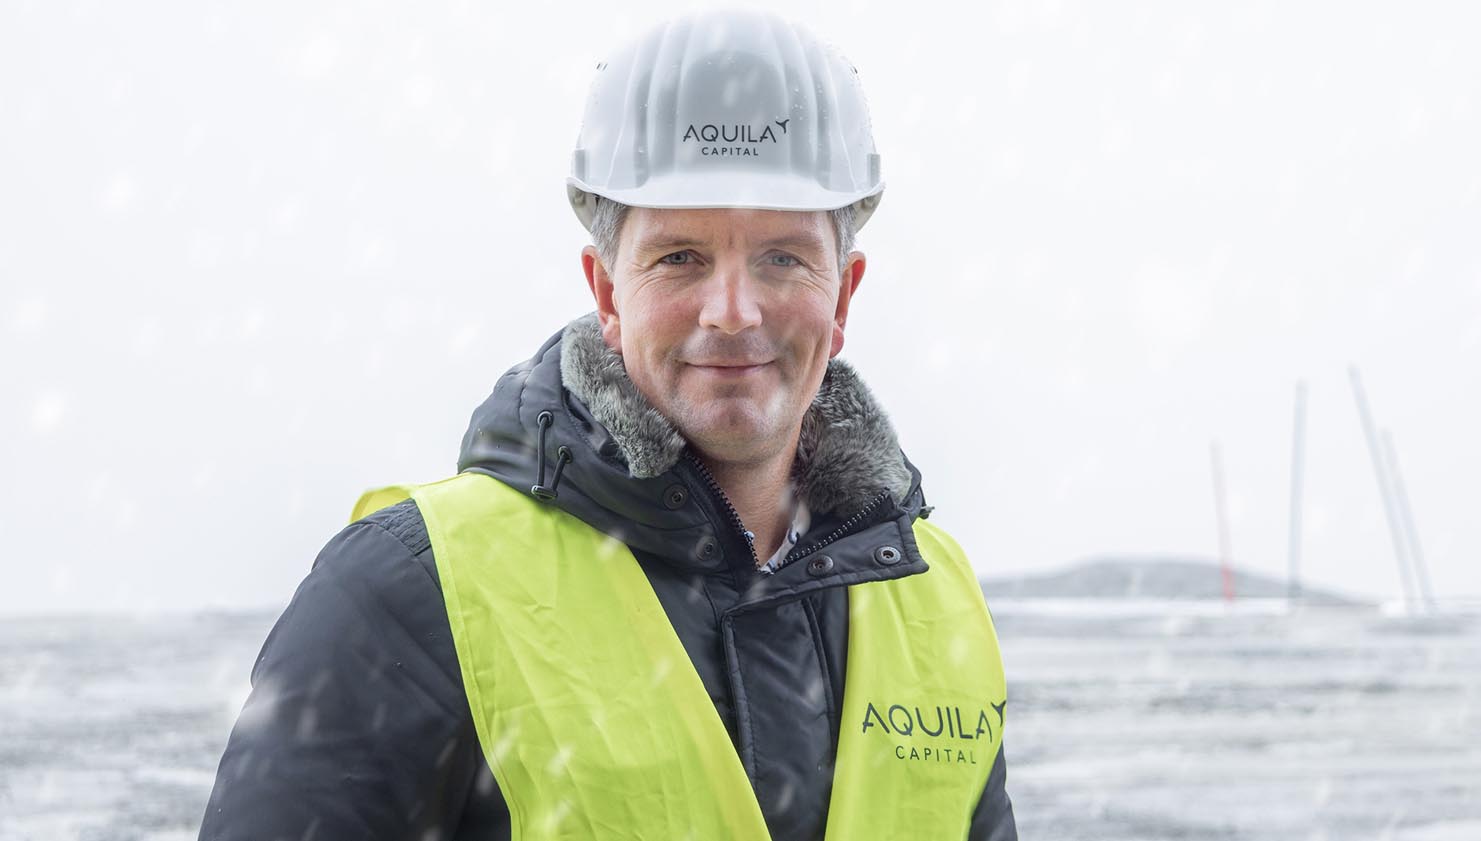 Investment Manager Energy & Infrastructure at Aquila Clean Energy, explains the challenges that our team had to encounter during the construction phase of the wind farm “The Rock”: the largest construction project in our history so far